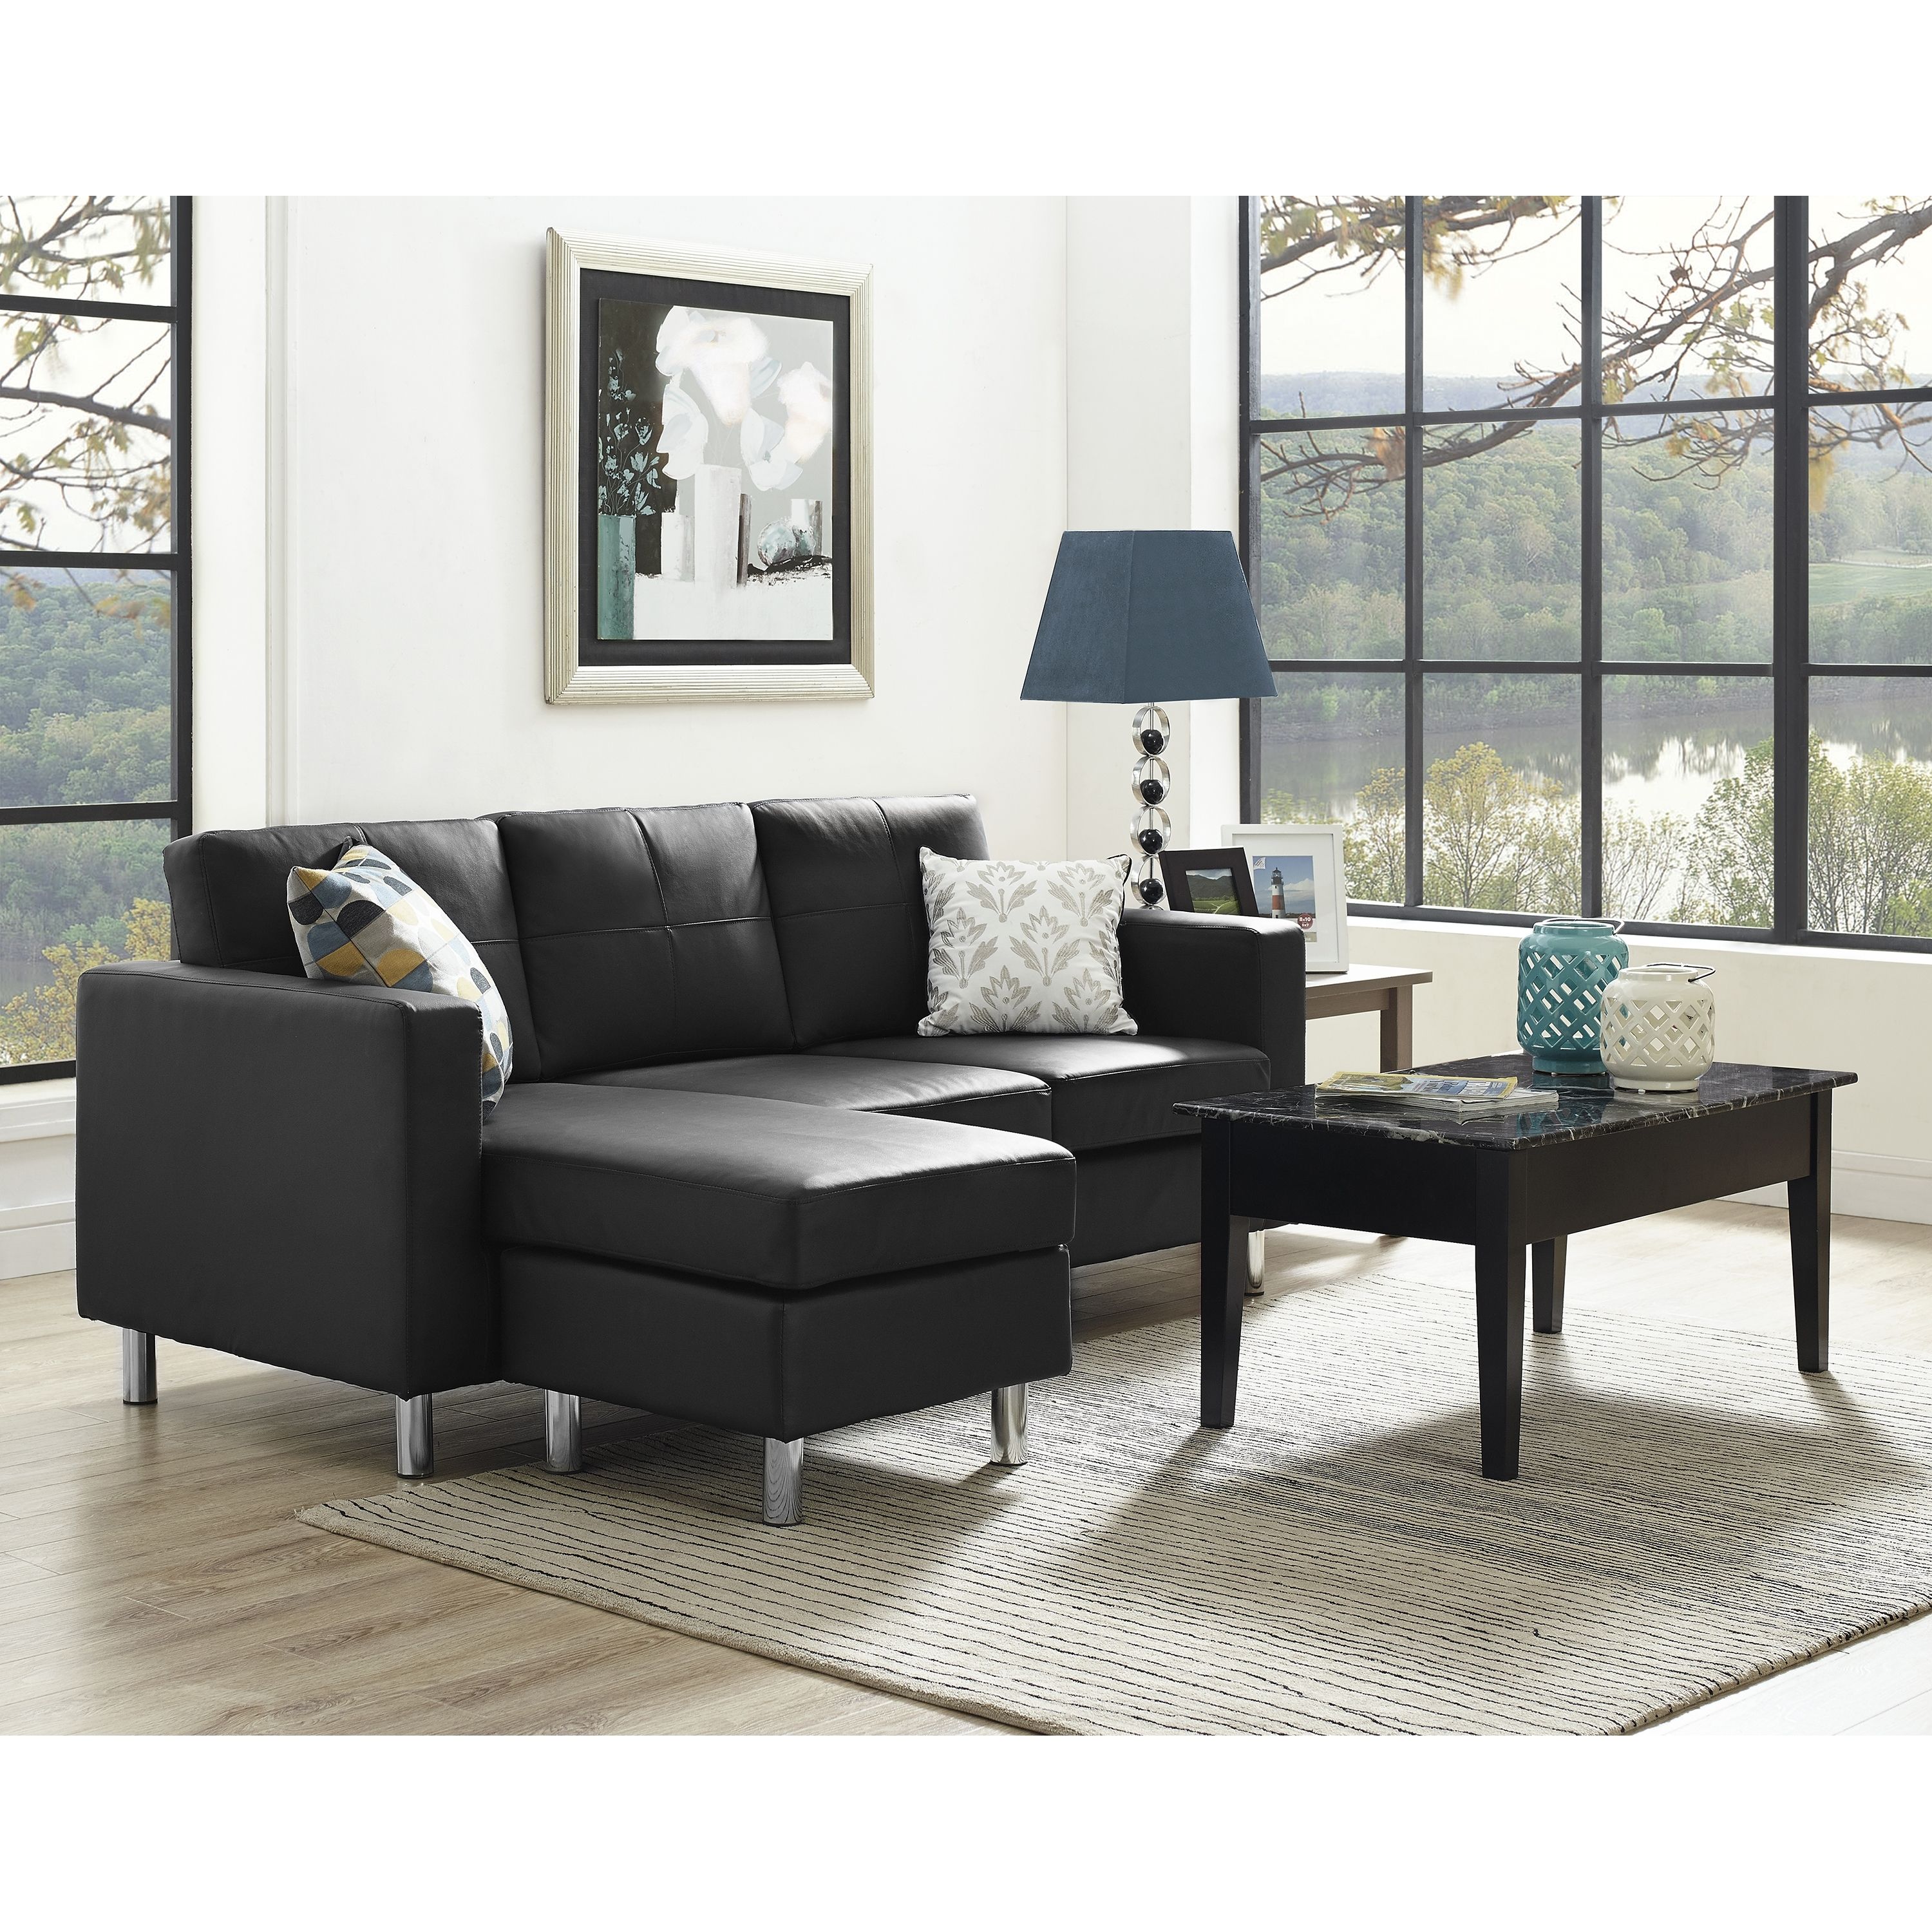 Best Sears Sectional Sofa 79 In Costco Leather Sectional Sofa With Throughout Sectional Sofas At Sears (View 4 of 10)